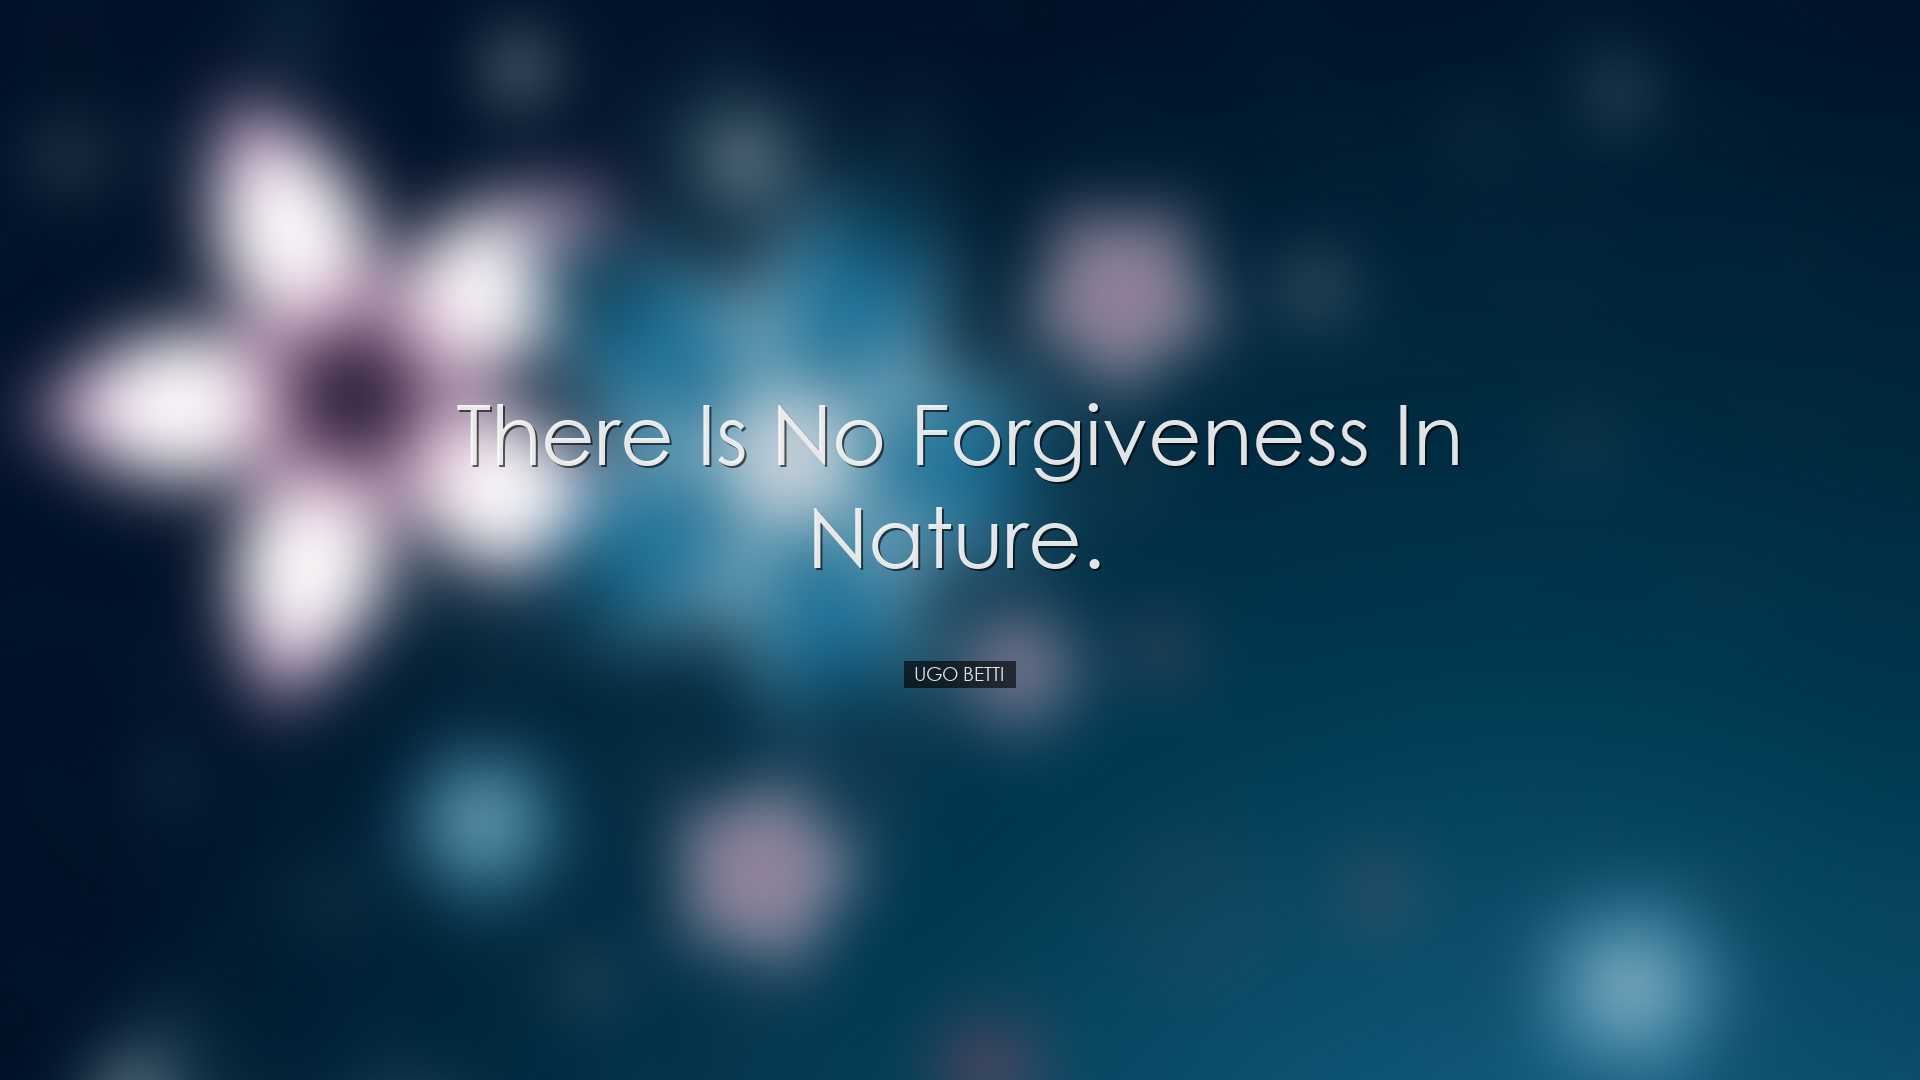 There is no forgiveness in nature. - Ugo Betti